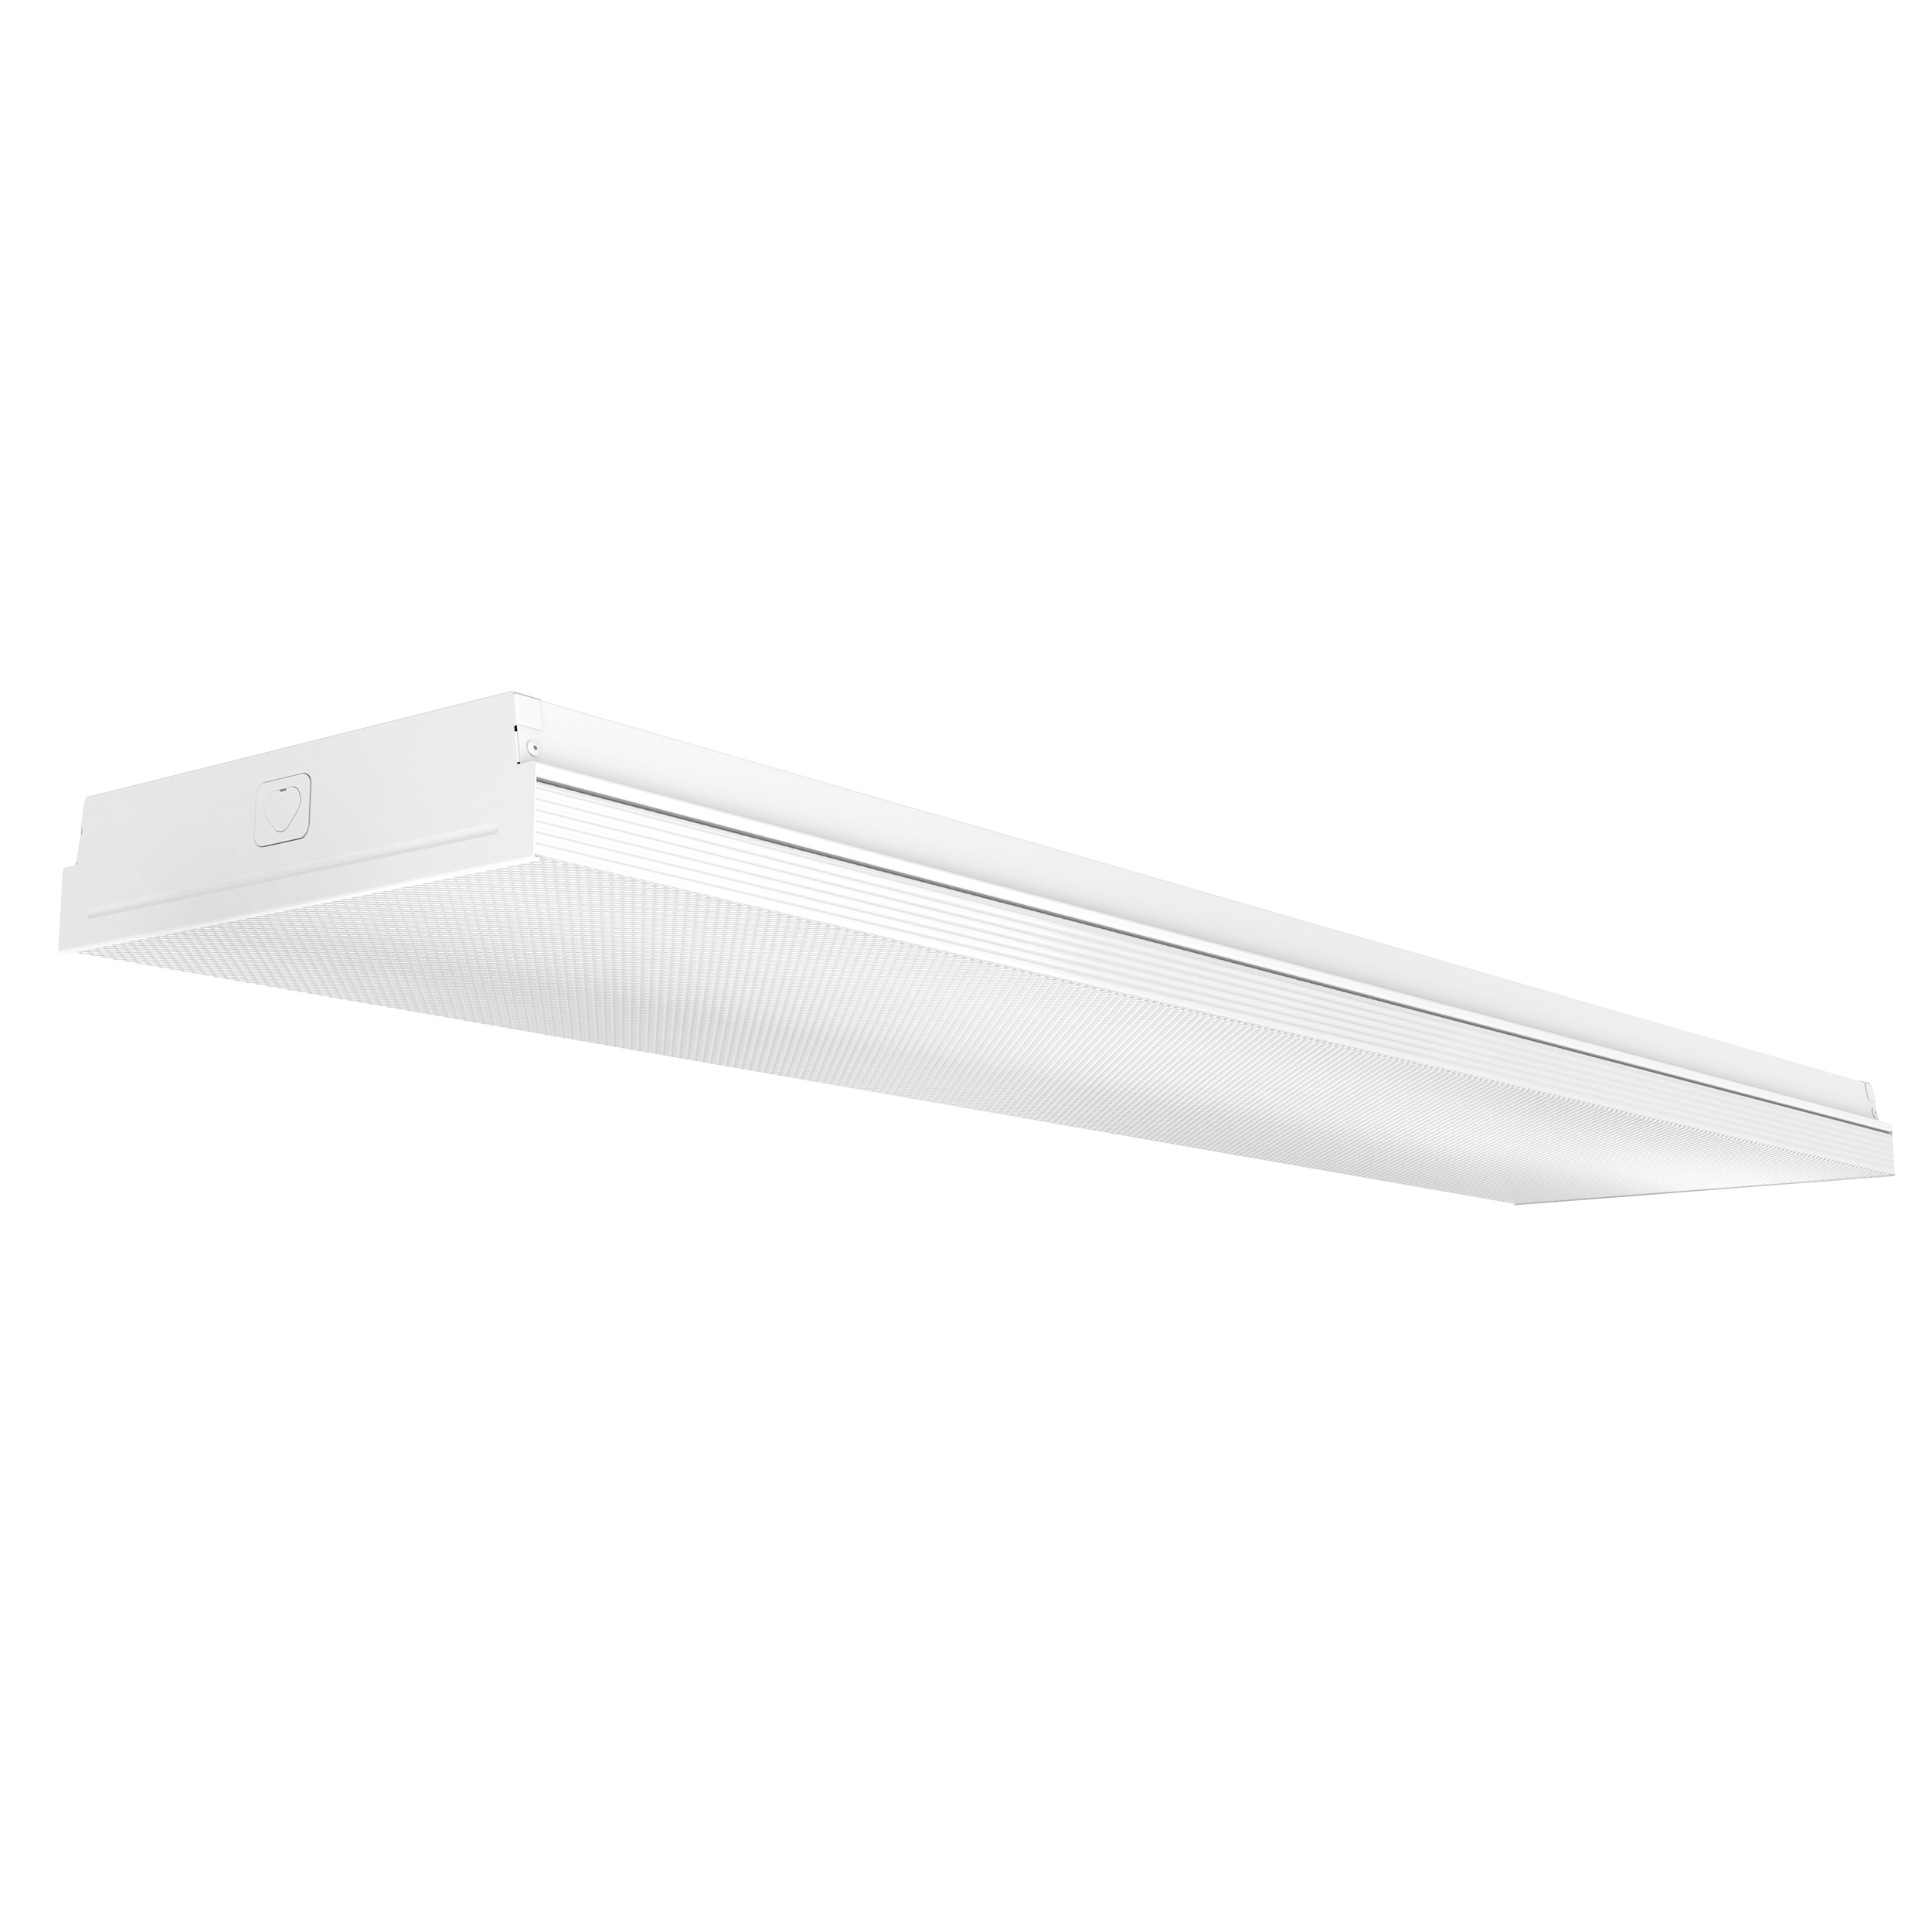 The 11-inch Prisma Wraparound LED Shop Light with a prismatic lens cover offers 50,000 lifetime hours so you do not need to relamp as often as with your traditional tube light fixtures. It consumes only 72W and is equivalent to a 300W fixture. It offers instant on, bright light with an impressive 8500lm high lumen count. Image here shows the full 4ft length of the LED shop light. This light is flush mounted and not suspended.